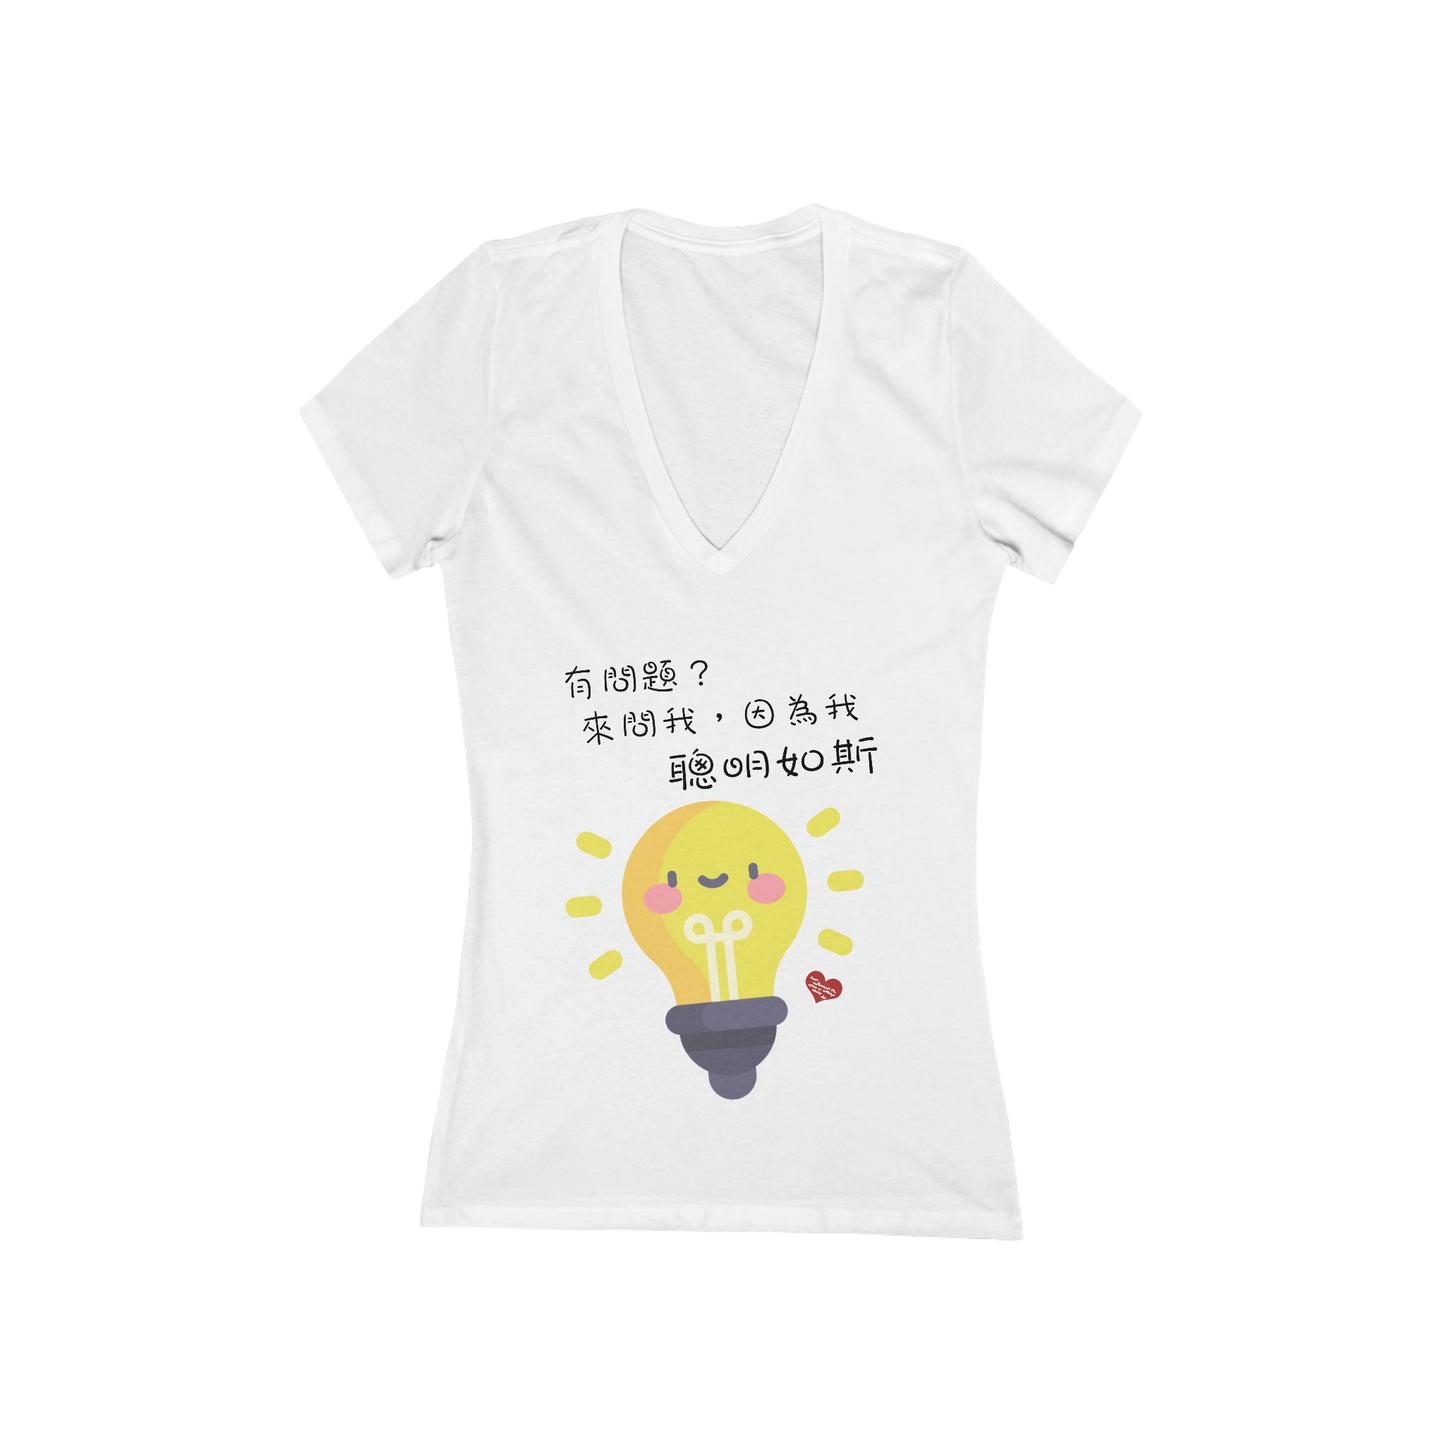 Women's Ask Me Anything Because I'm Smart Idiom T-Shirt Deep V-Neck Tee